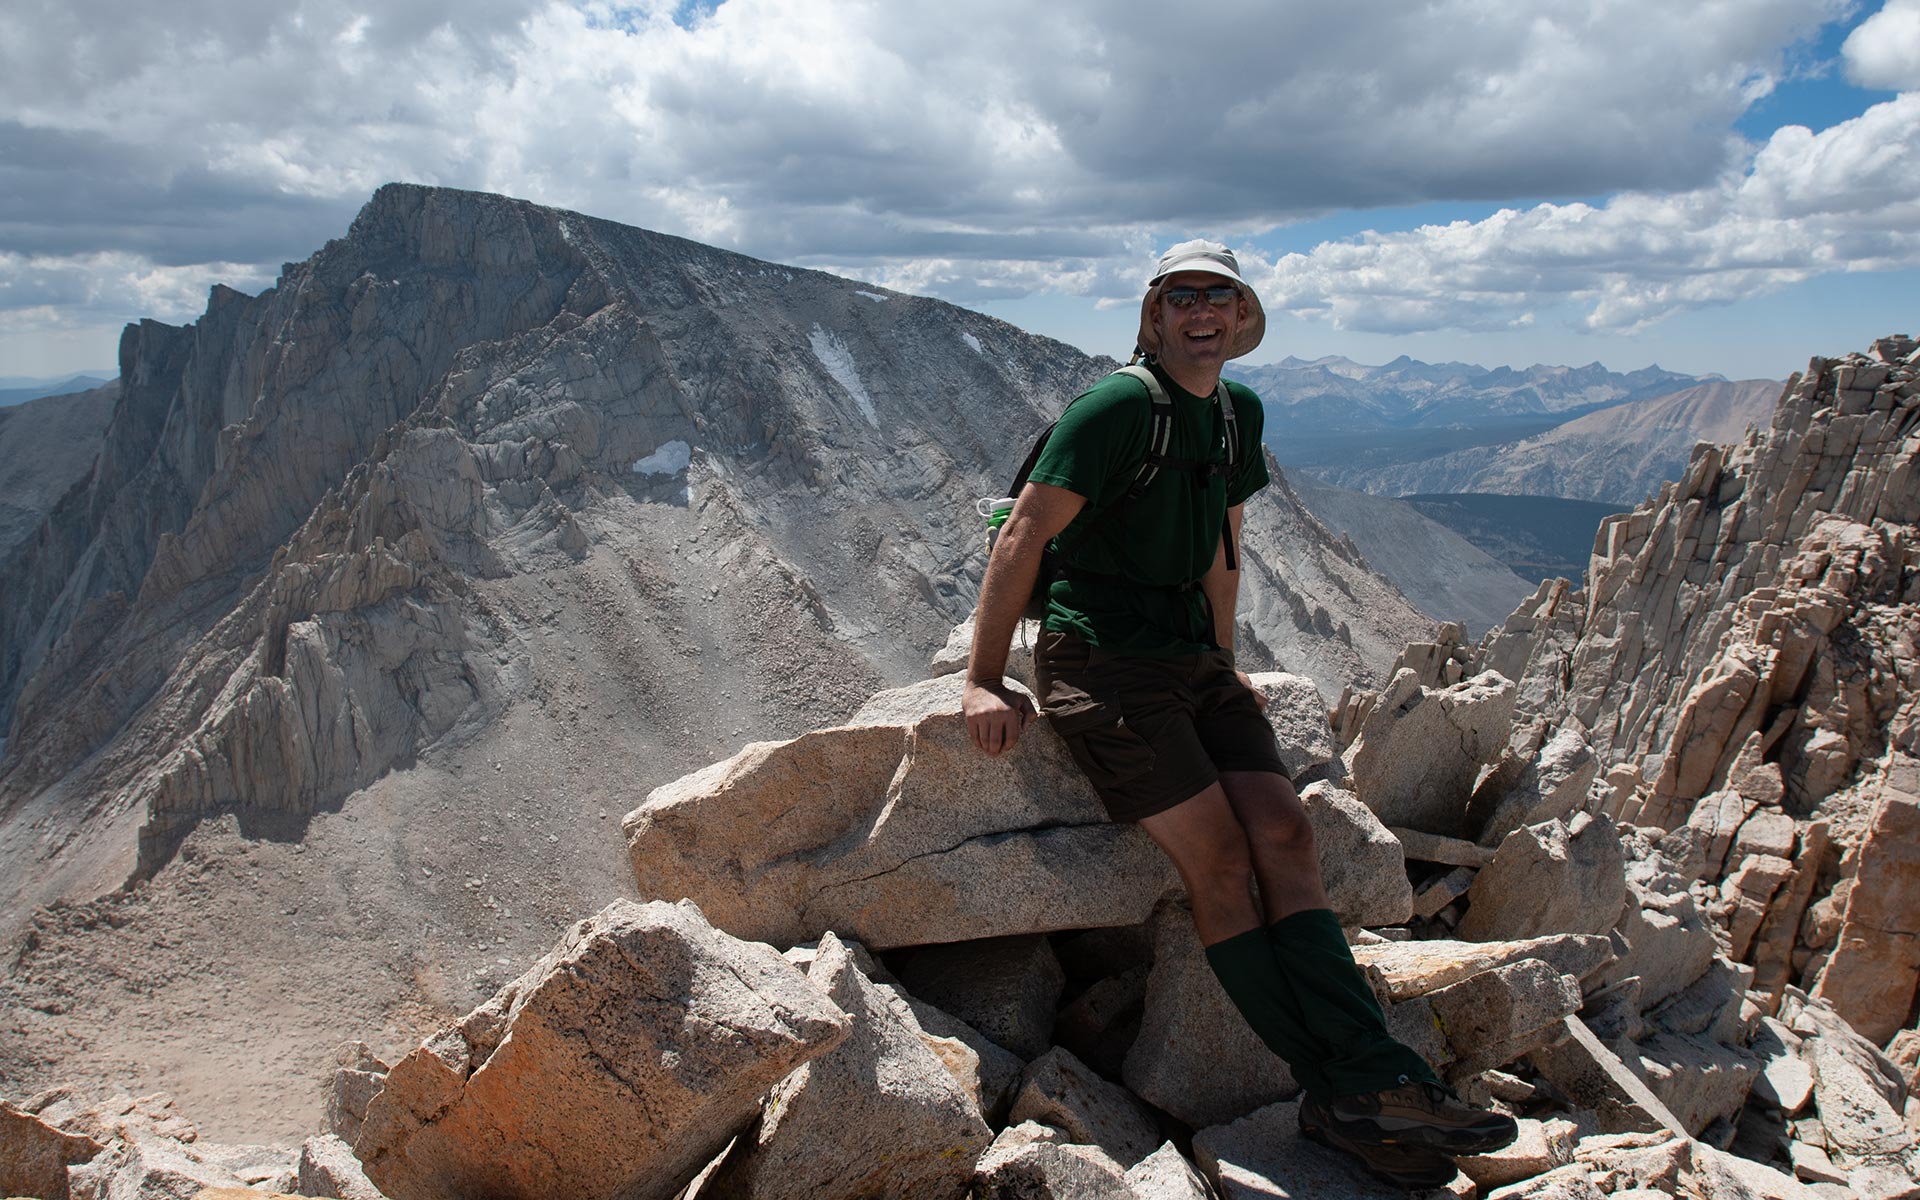 Mount Whitney's North Face from atop Mount Russell